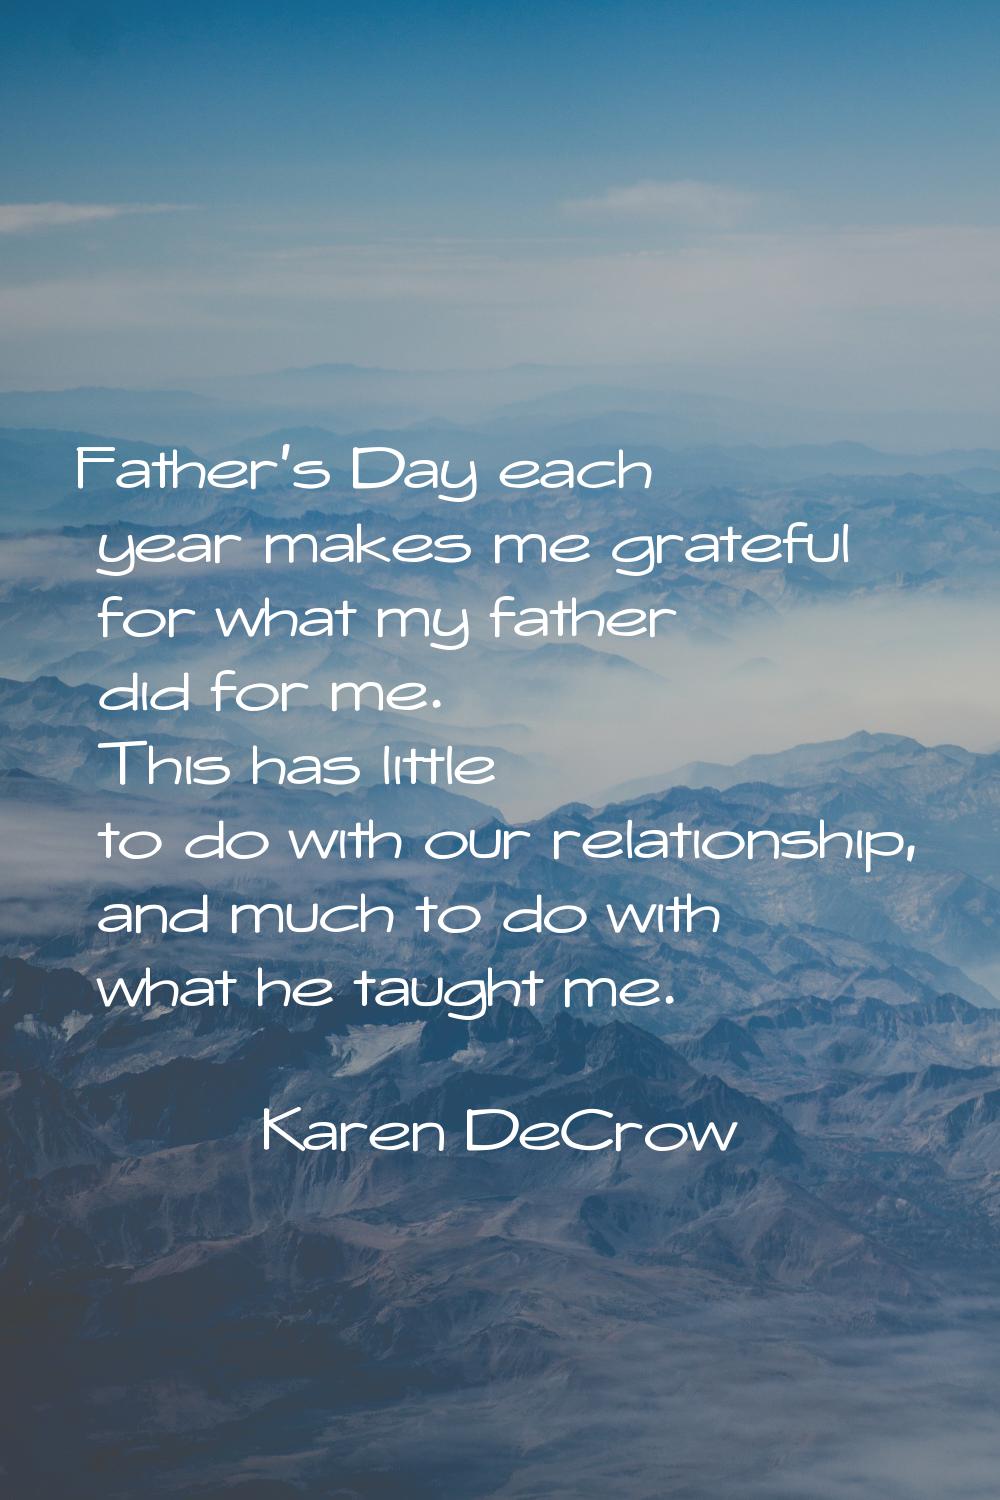 Father's Day each year makes me grateful for what my father did for me. This has little to do with 